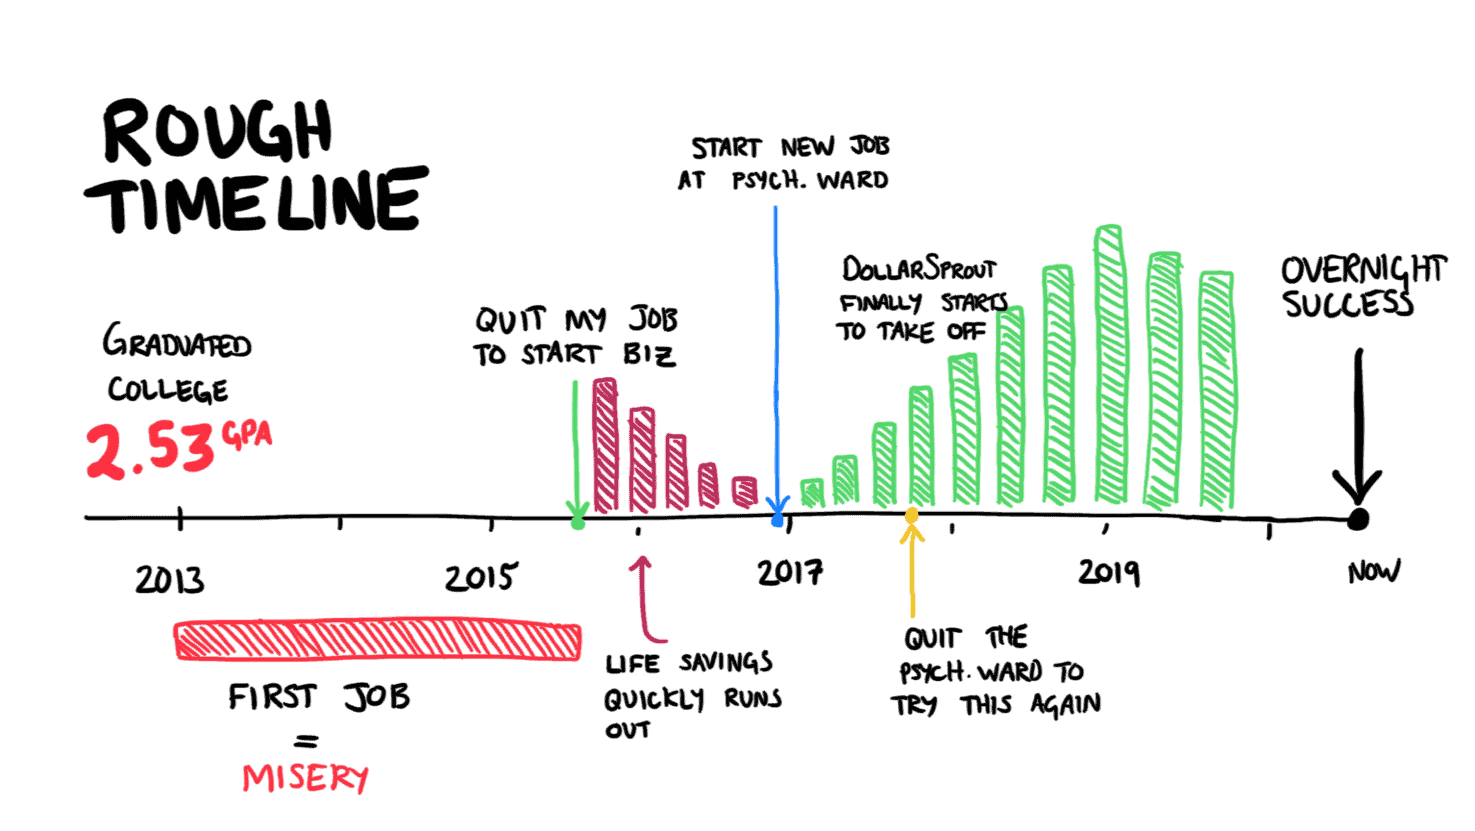 A rough timeline on how we started DollarSprout